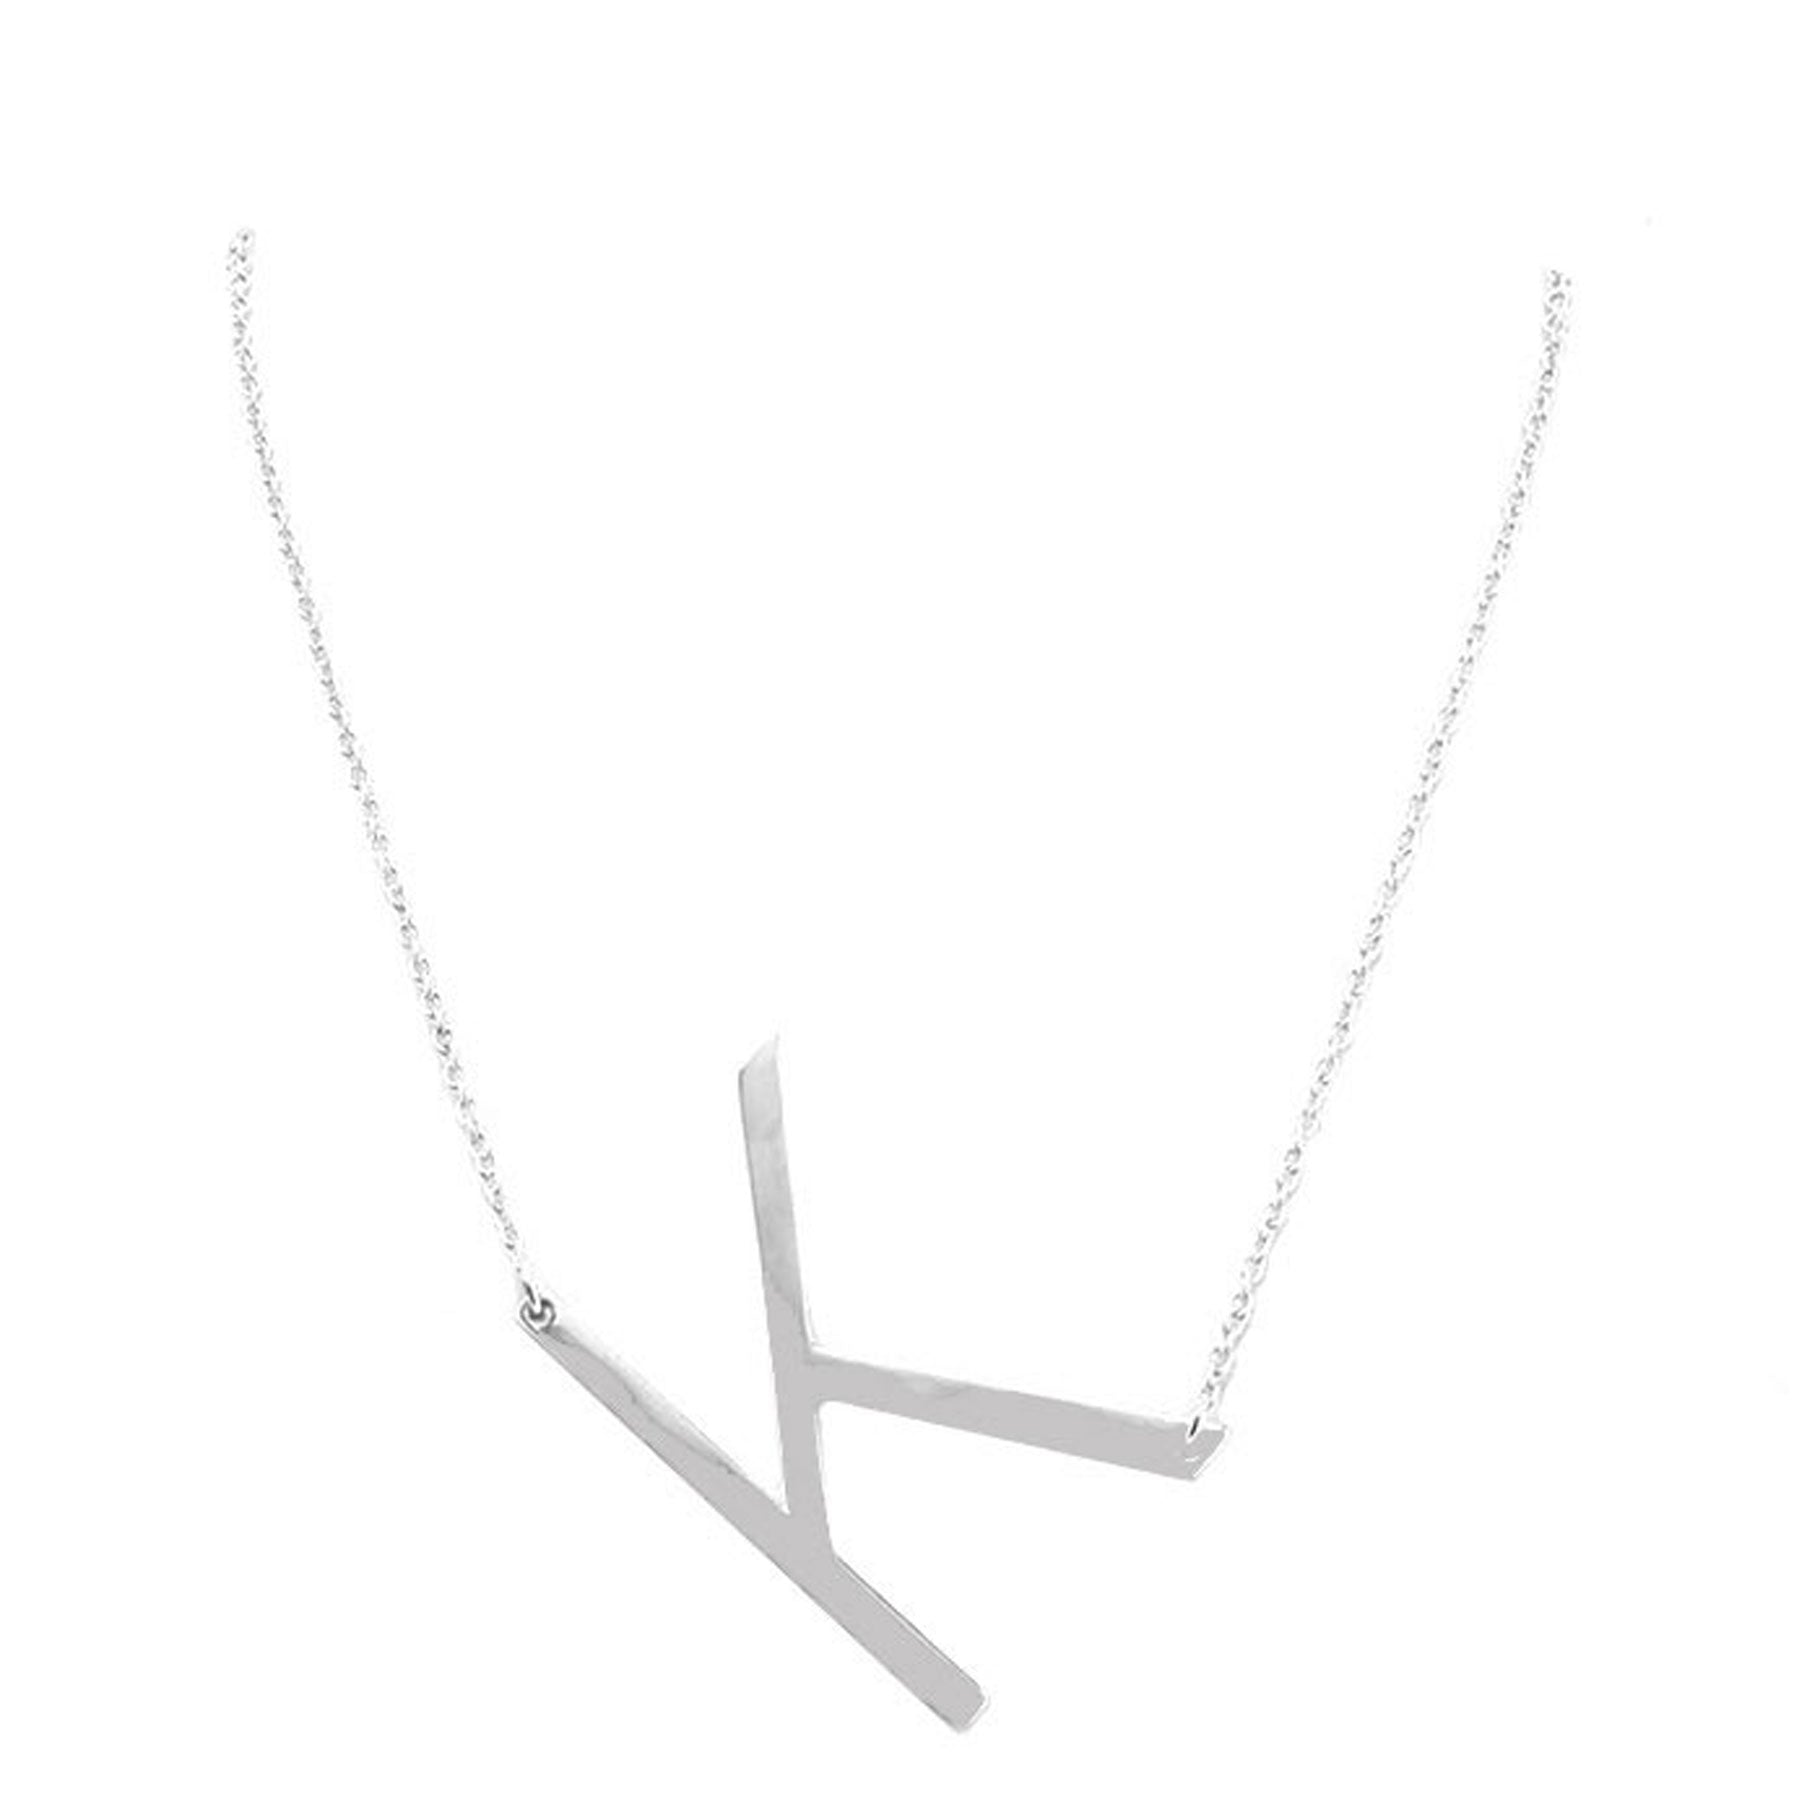 Silver K Monogram Metal Pendant Necklace. Beautifully crafted design adds a gorgeous glow to any outfit. Jewelry that fits your lifestyle! Perfect Birthday Gift, Anniversary Gift, Mother's Day Gift, Anniversary Gift, Graduation Gift, Prom Jewelry, Just Because Gift, Thank you Gift.